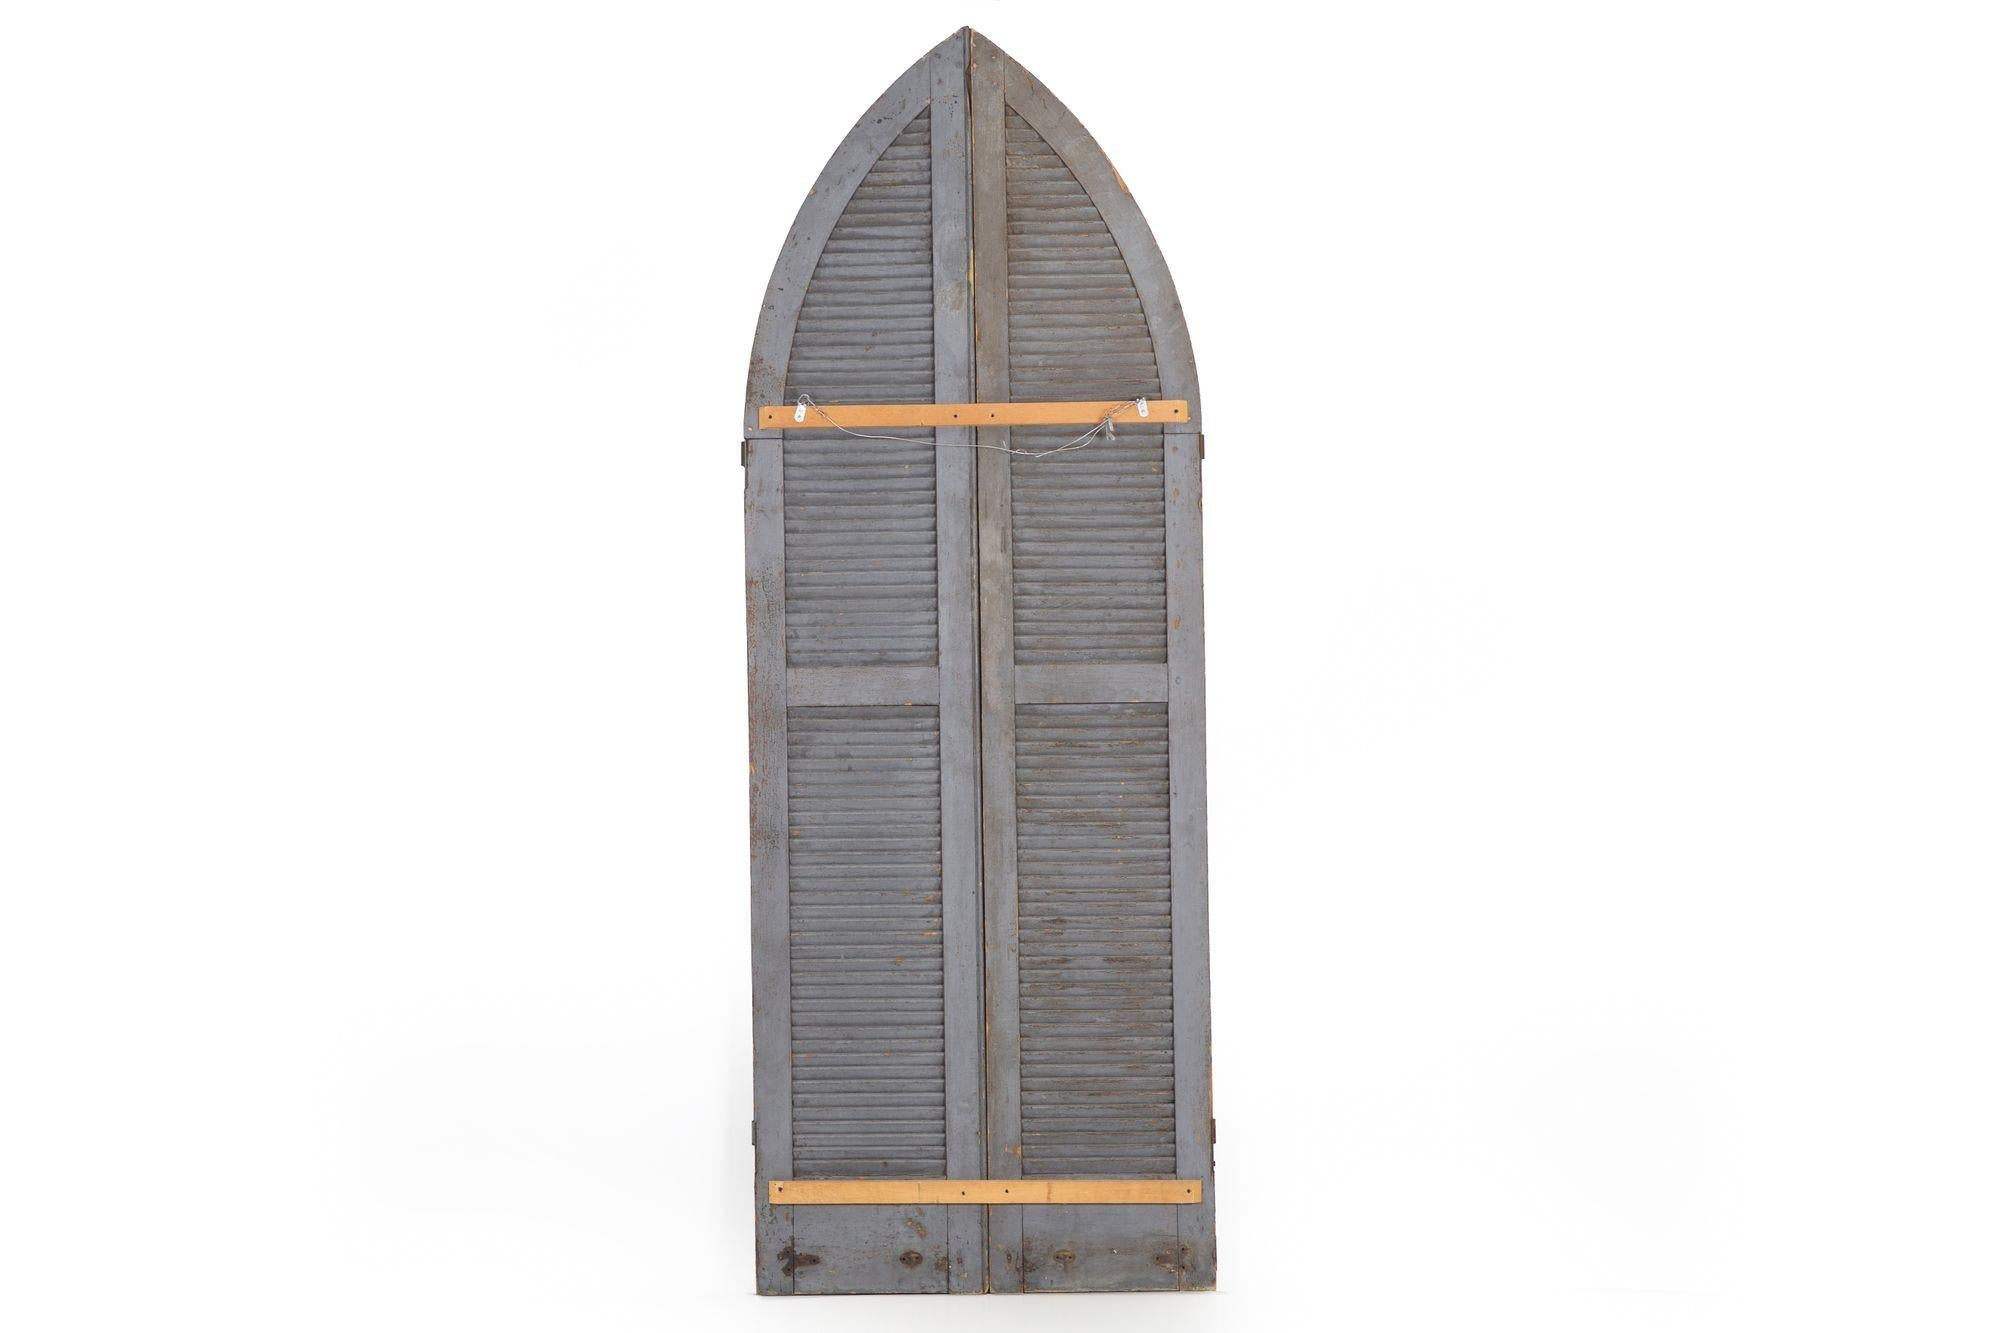 PAIR OF WEATHERED GRAY-PAINTED ARCHED DOME LOUVERED DOORS
American, circa 19th century
Item # 203MEK04P 

A vibrant pair of arched and louvered doors with wonderful early craftsmanship utilizing tenon-mortised joints secured with tiny wooden pins,